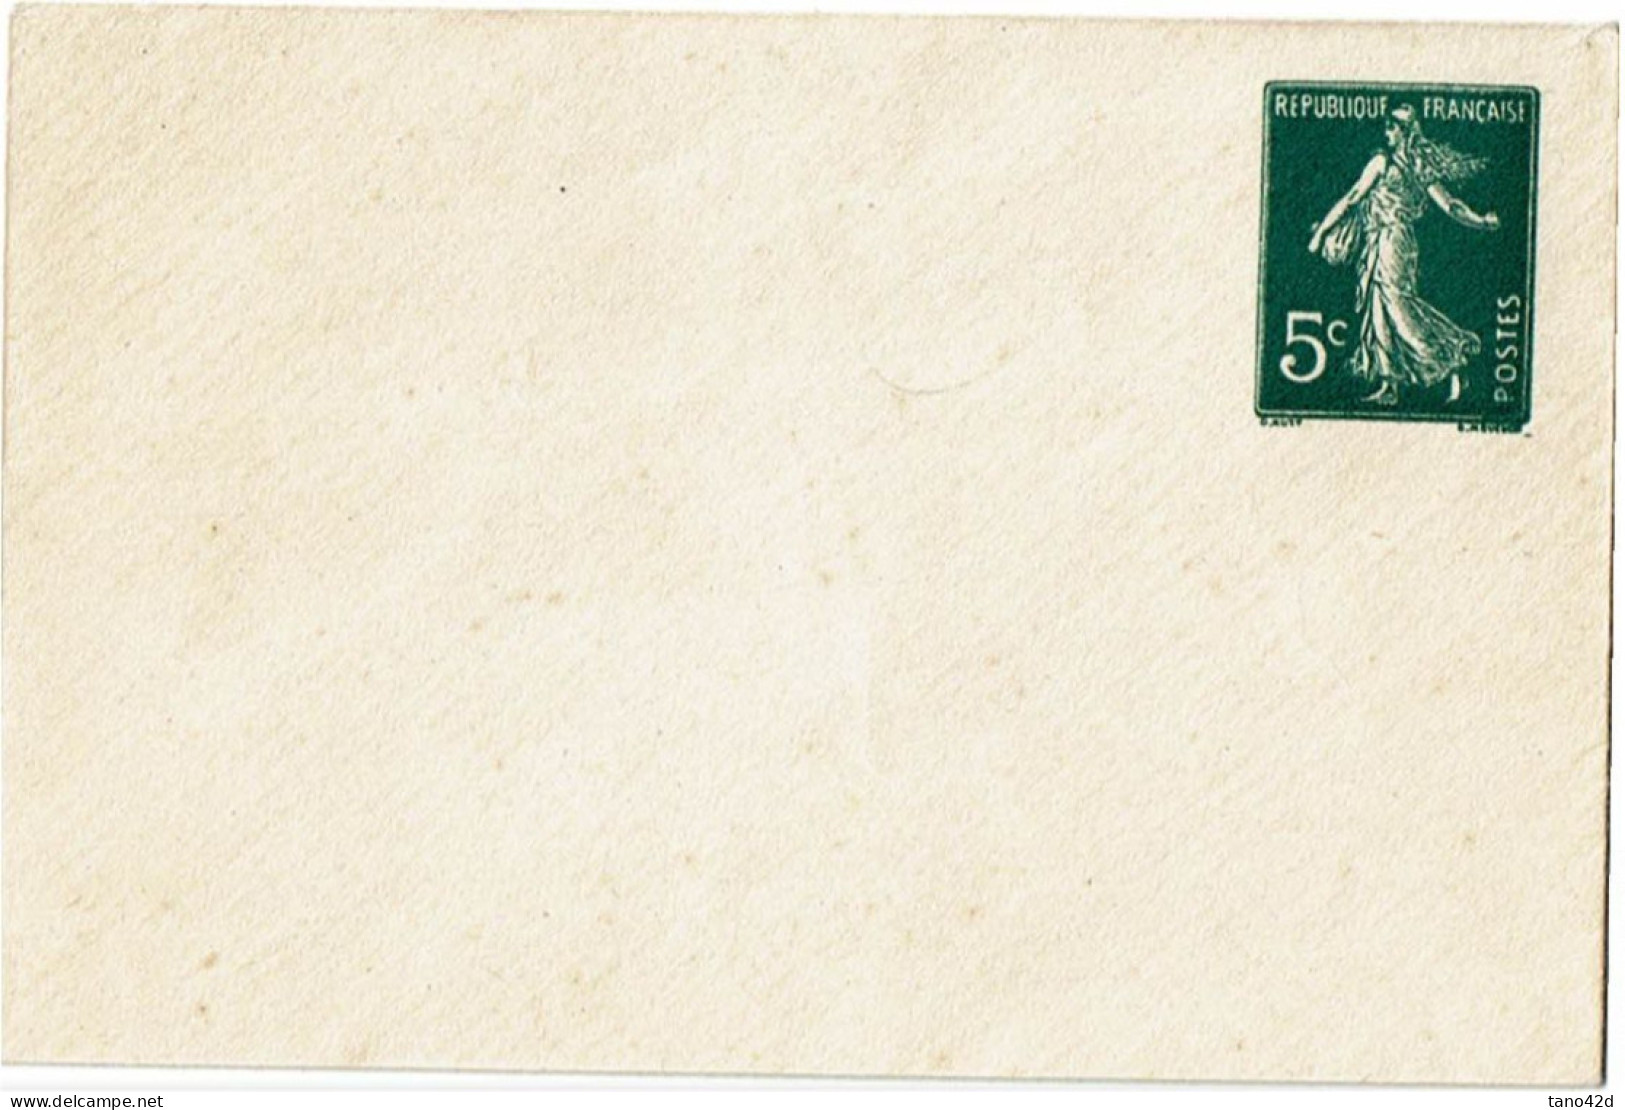 PP15 - FRANCE 2 ENVELOPPES TYPE SEMEUSE CAMEE 5c VERT (D417) ET VERT FONCE (D021) - Standard Covers & Stamped On Demand (before 1995)